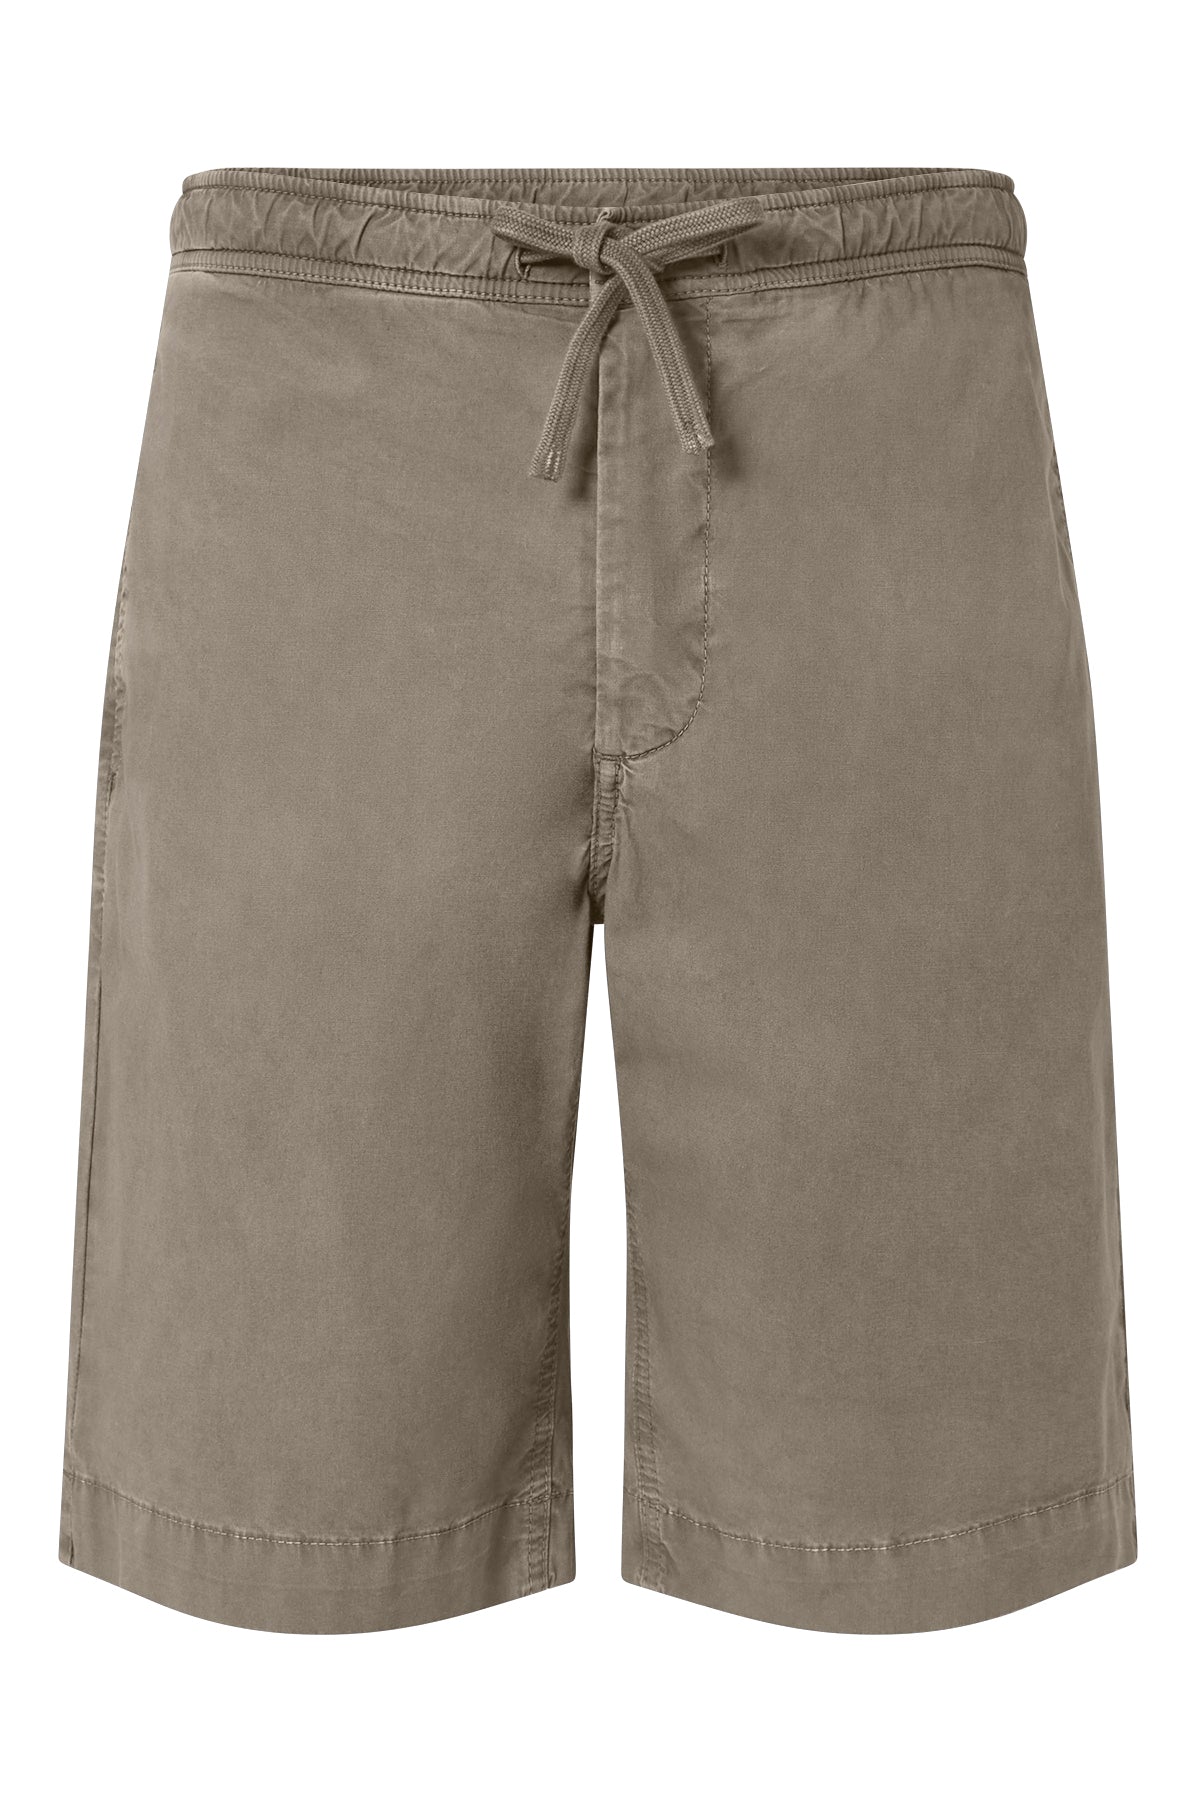 SHORTS ETHICA TAUPE